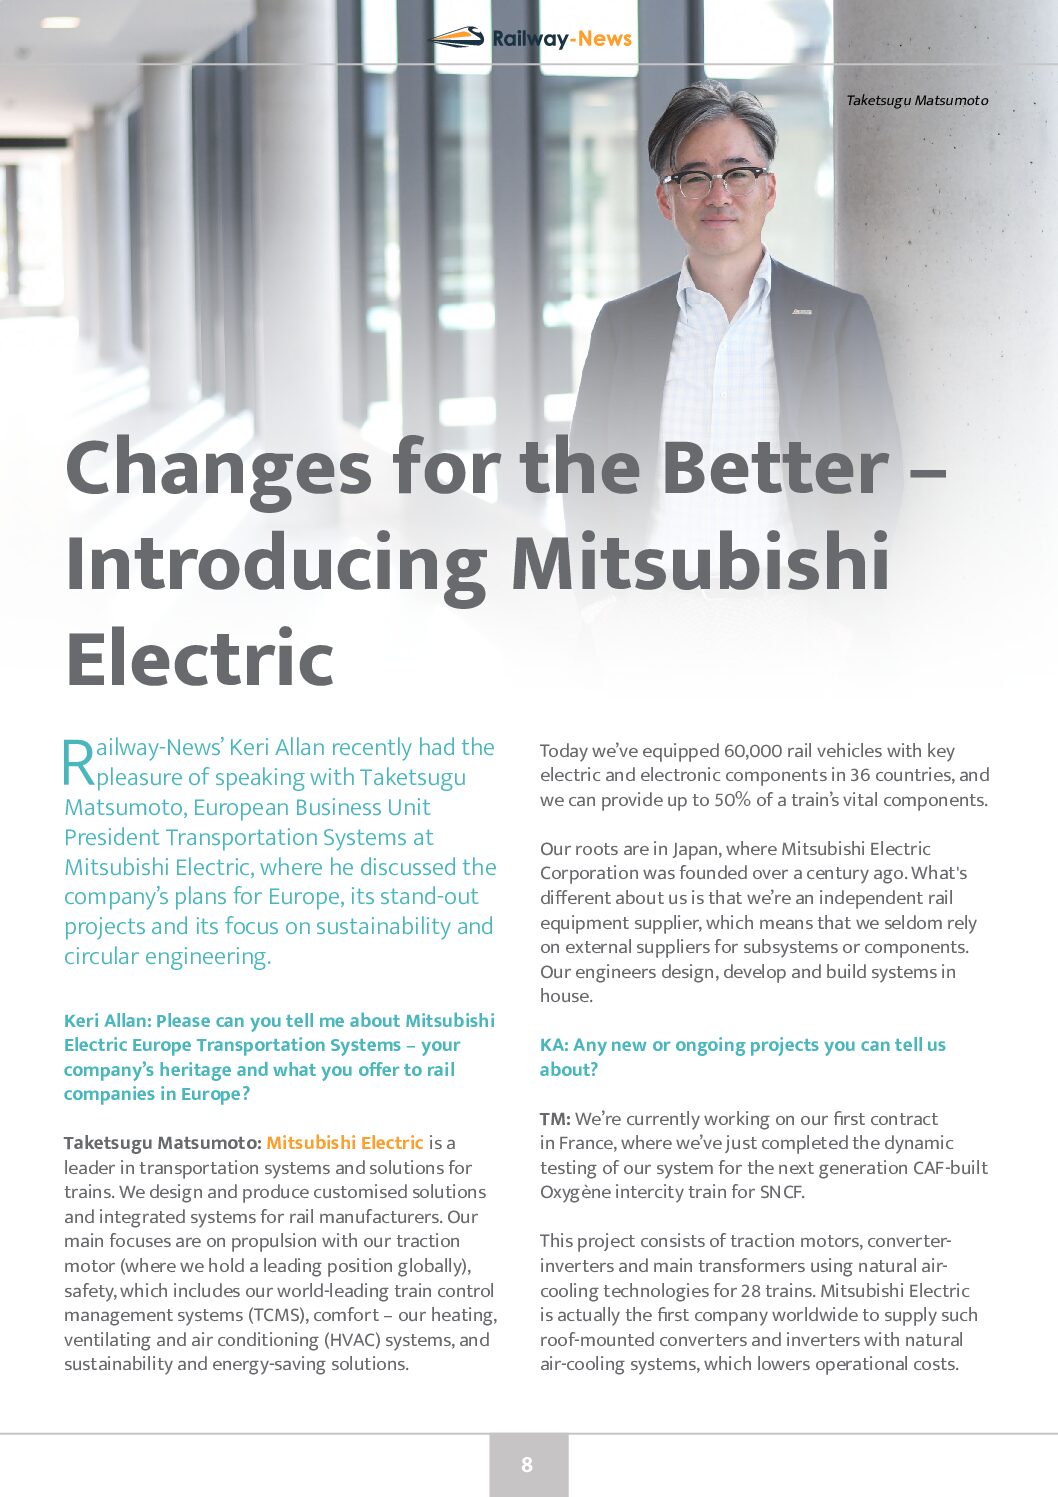 Changes for the Better – Introducing Mitsubishi Electric